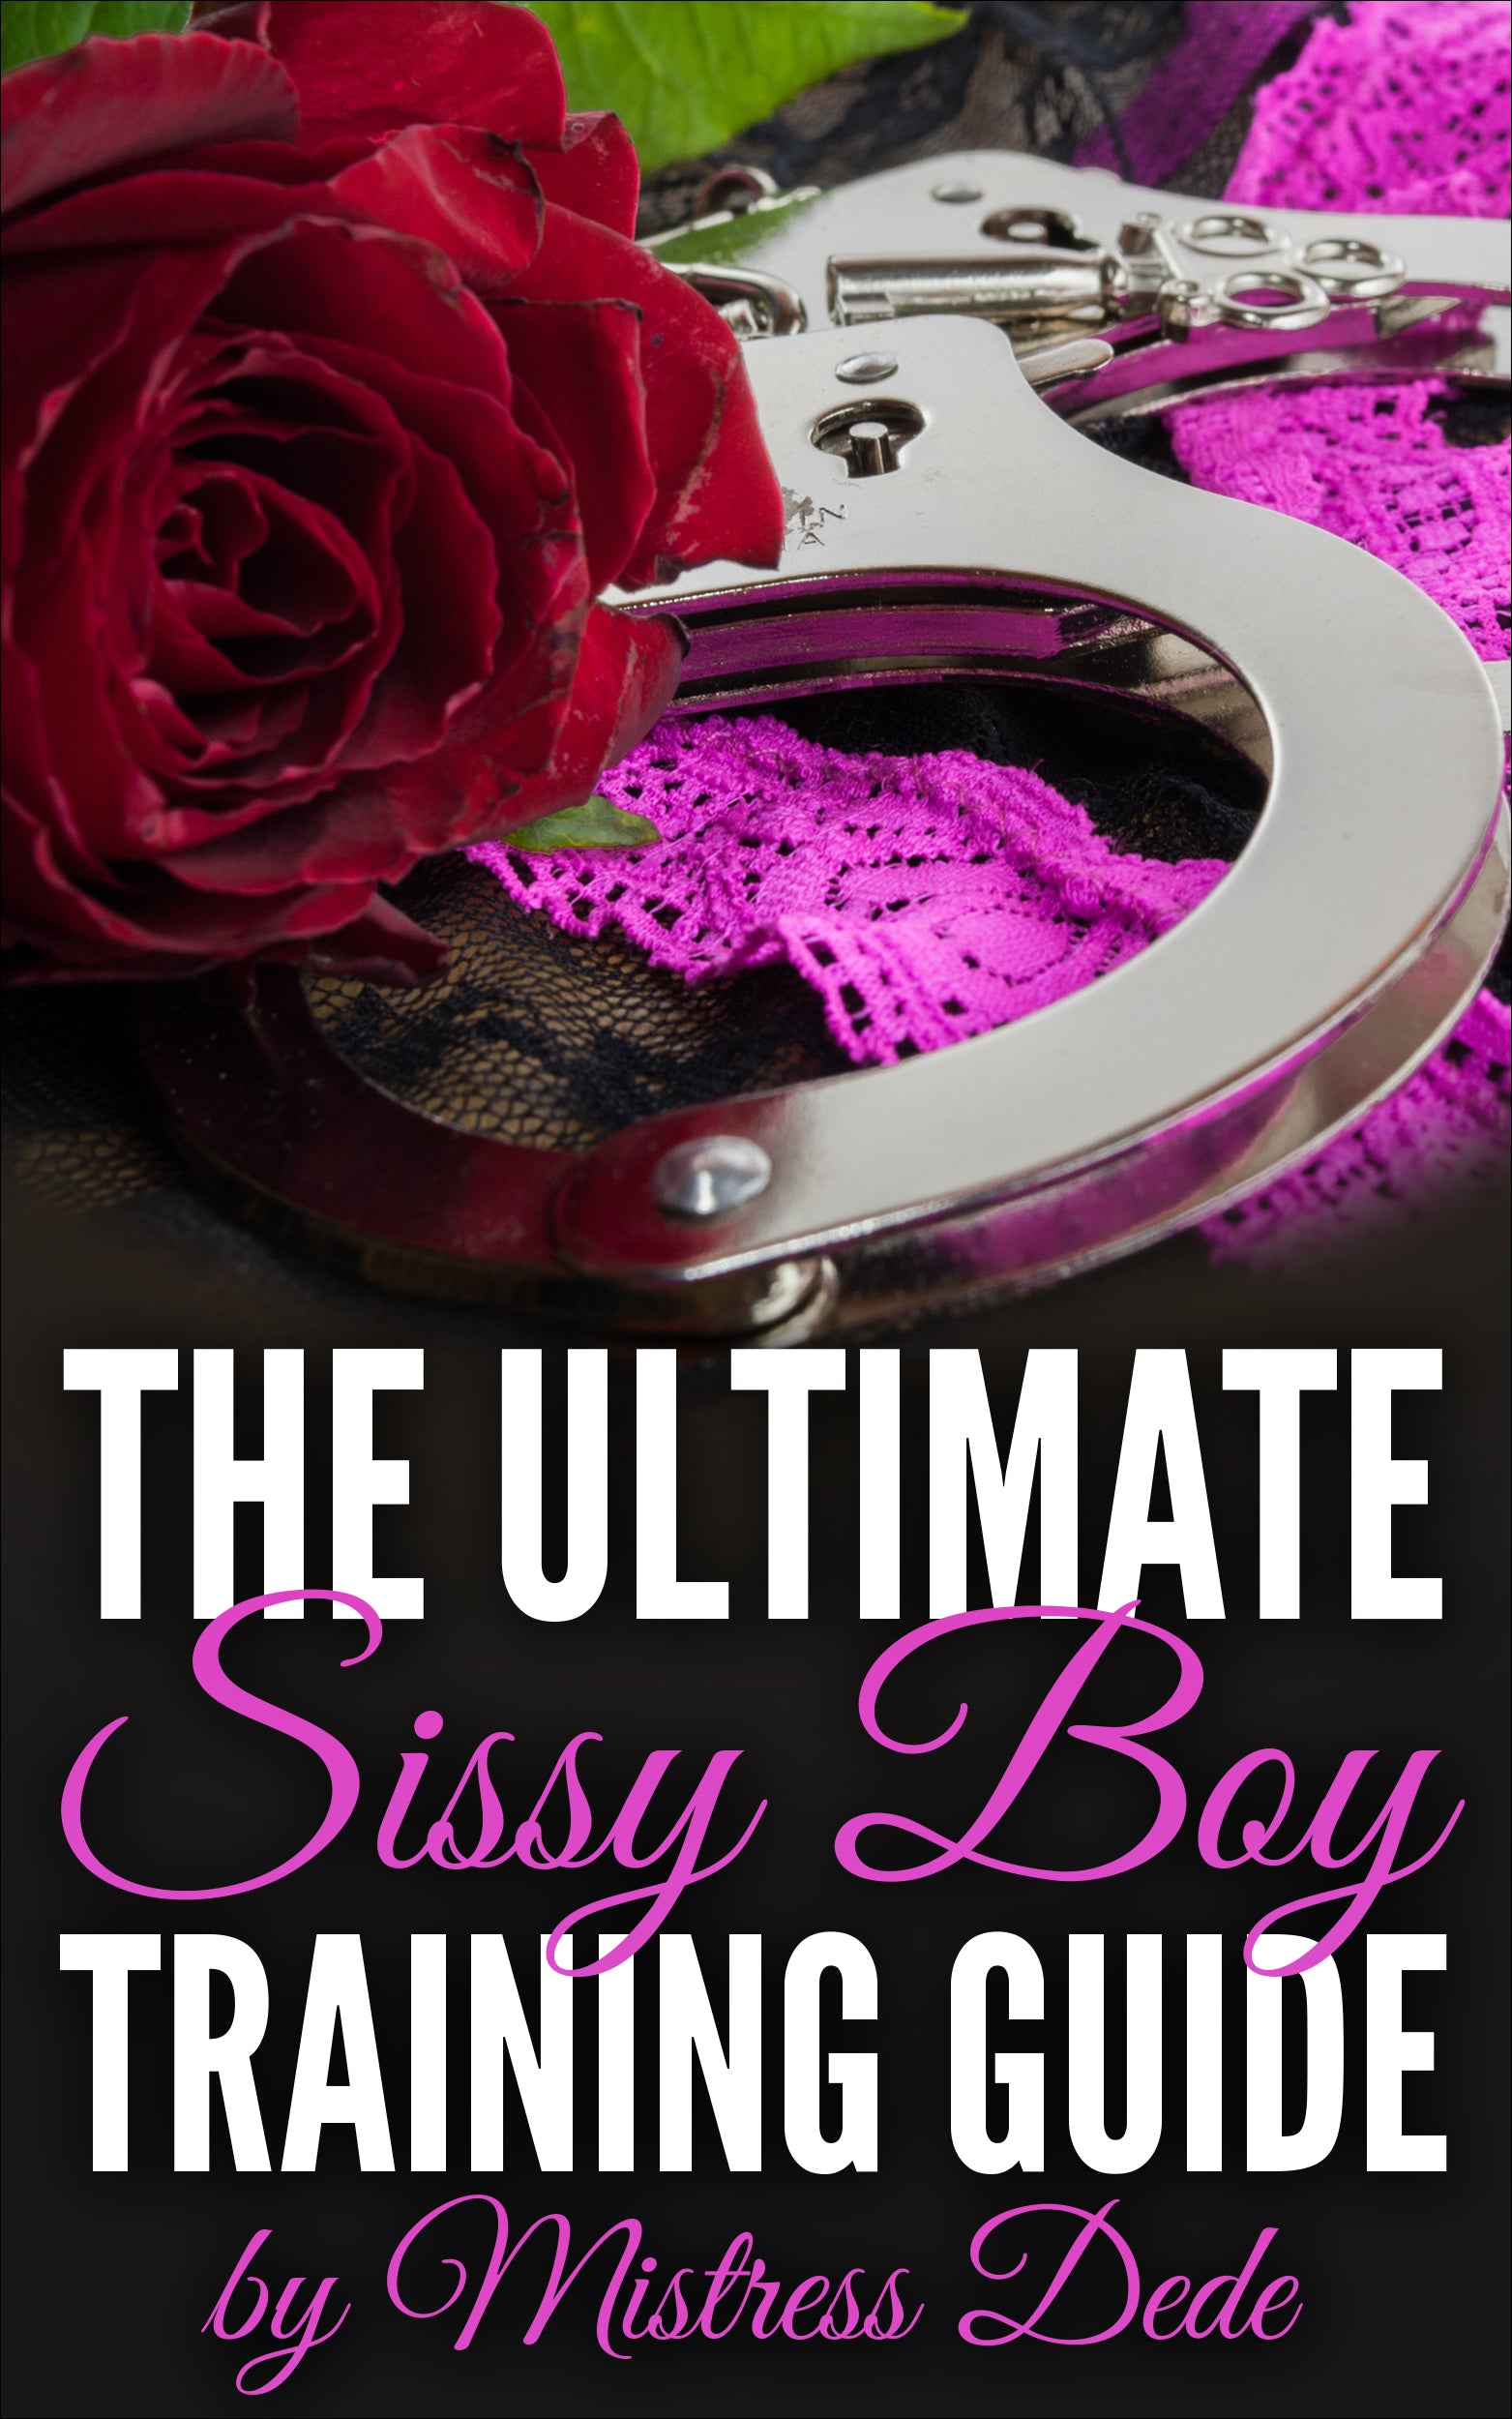 The Ultimate Sissy Boy Training Guide - Sissy Panty Shop